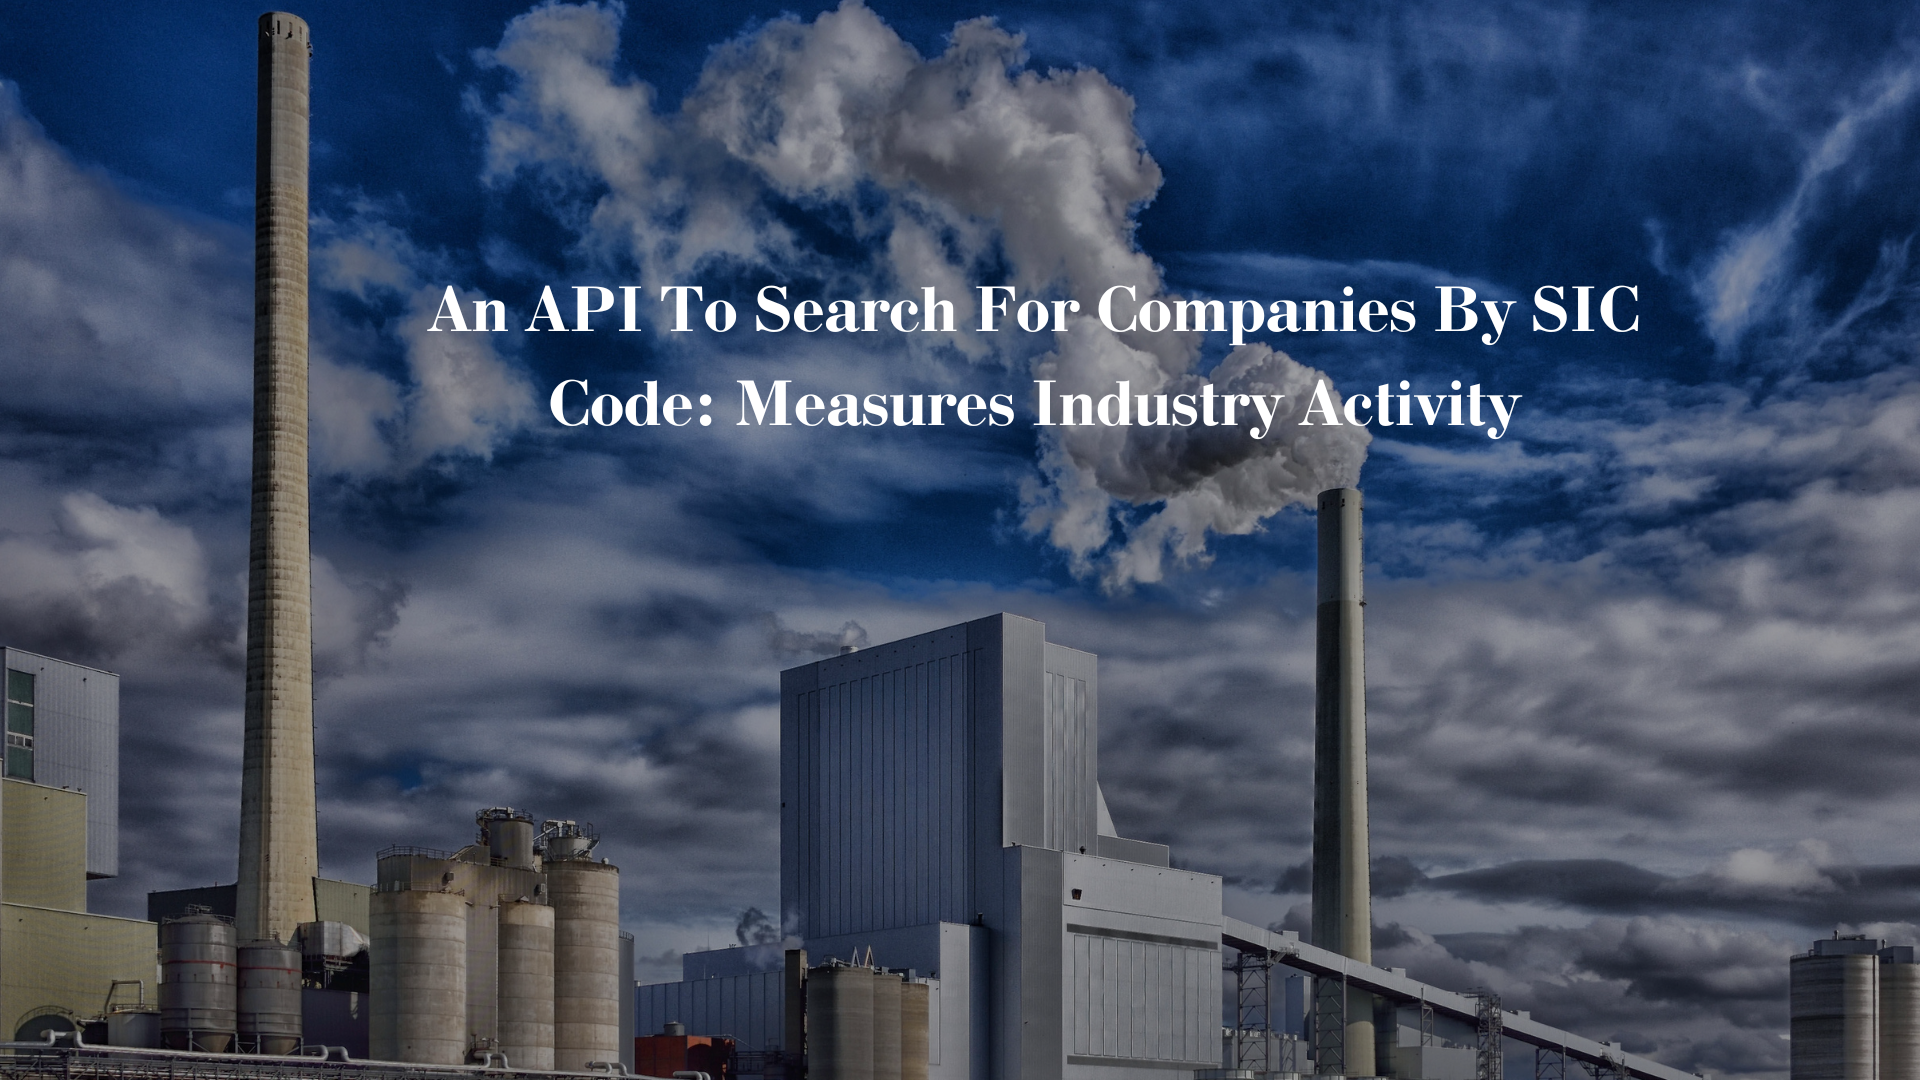 An API To Search For Companies By SIC Code: Measures Industry Activity